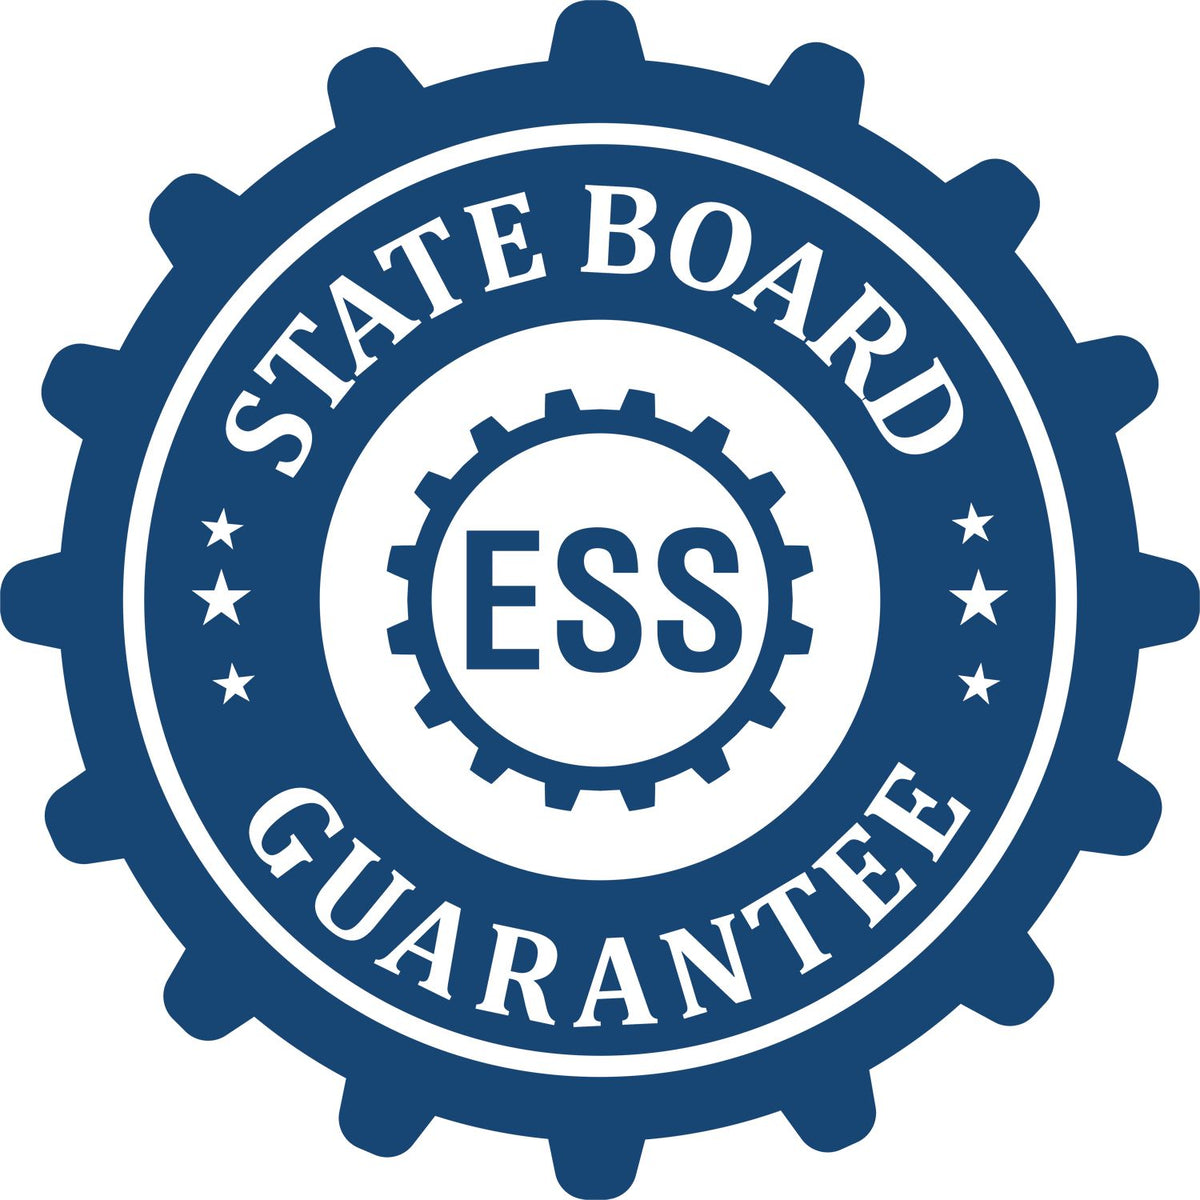 An emblem in a gear shape illustrating a state board guarantee for the Soft Connecticut Professional Geologist Seal